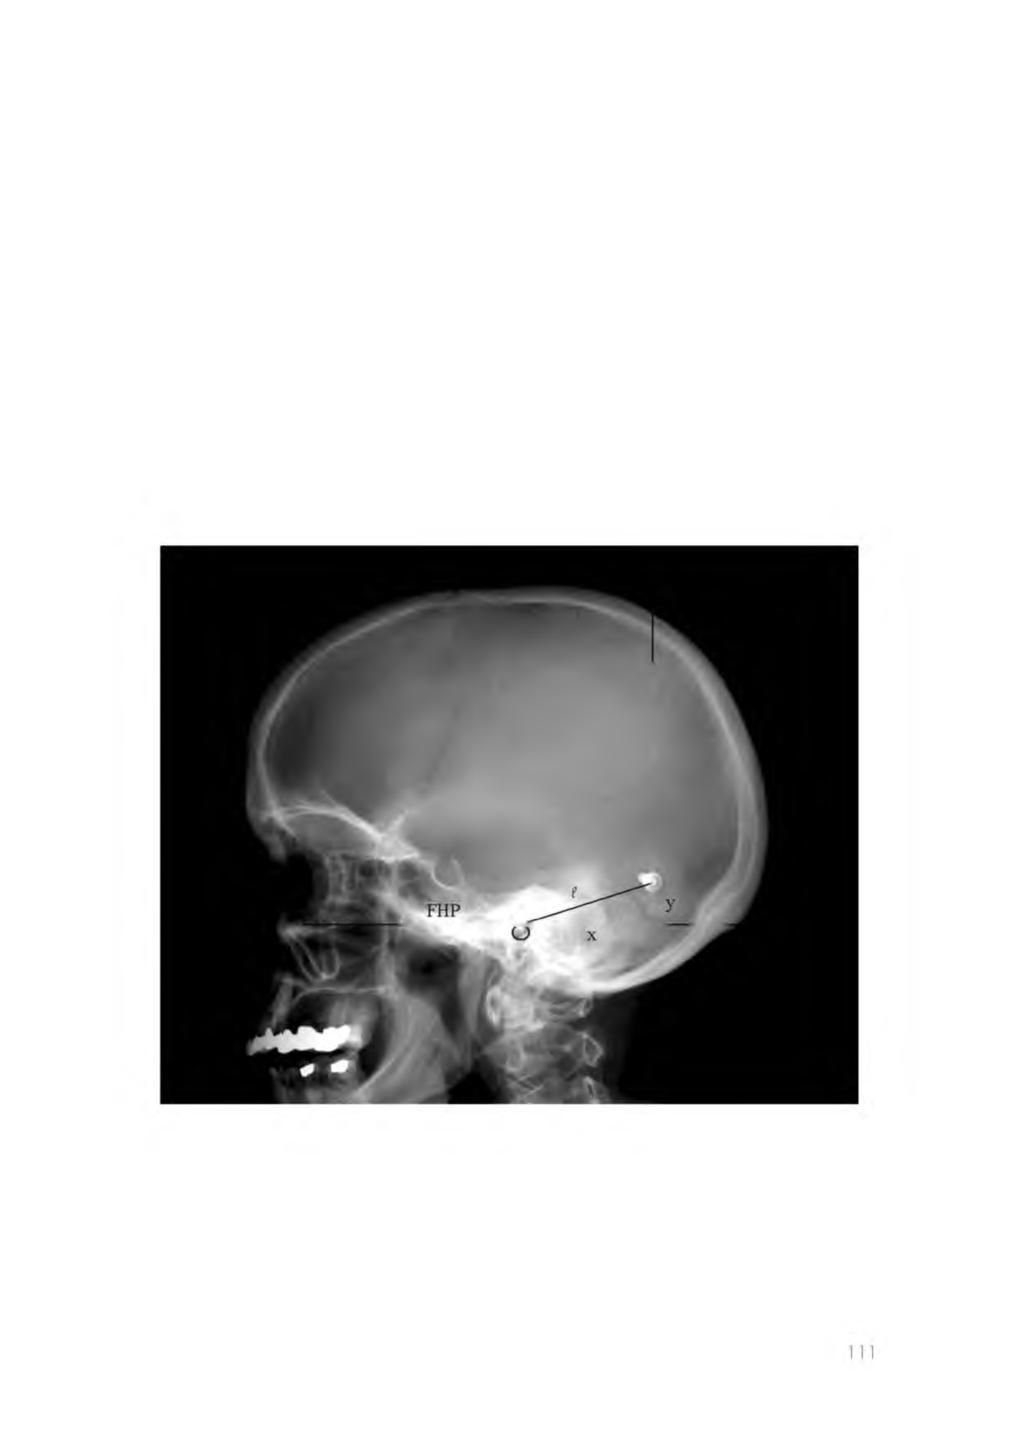 BAHA surgery; implant location, soft tissue reaction and thickness Implant position A standardized digital lateral conventional radiograph of the whole skull (Siemens, Erlangen, Germany), taken of